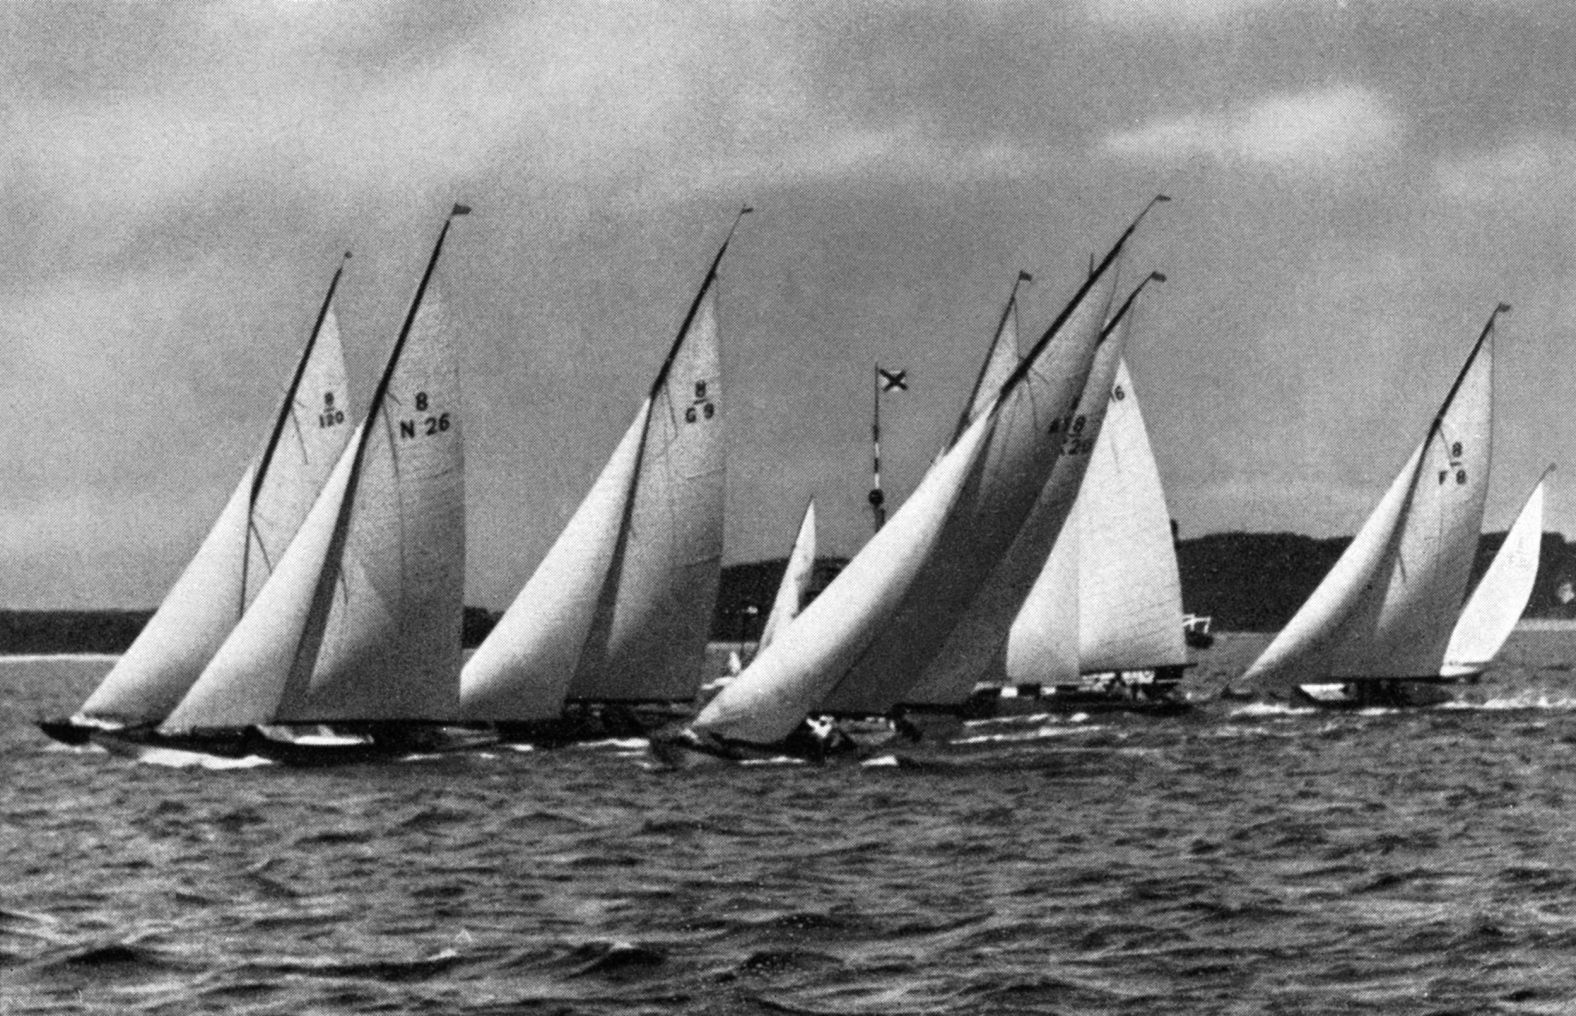 Thams won a silver medal as part of a sailing crew at the 1936 Summer Games. His boat is seen second from left.